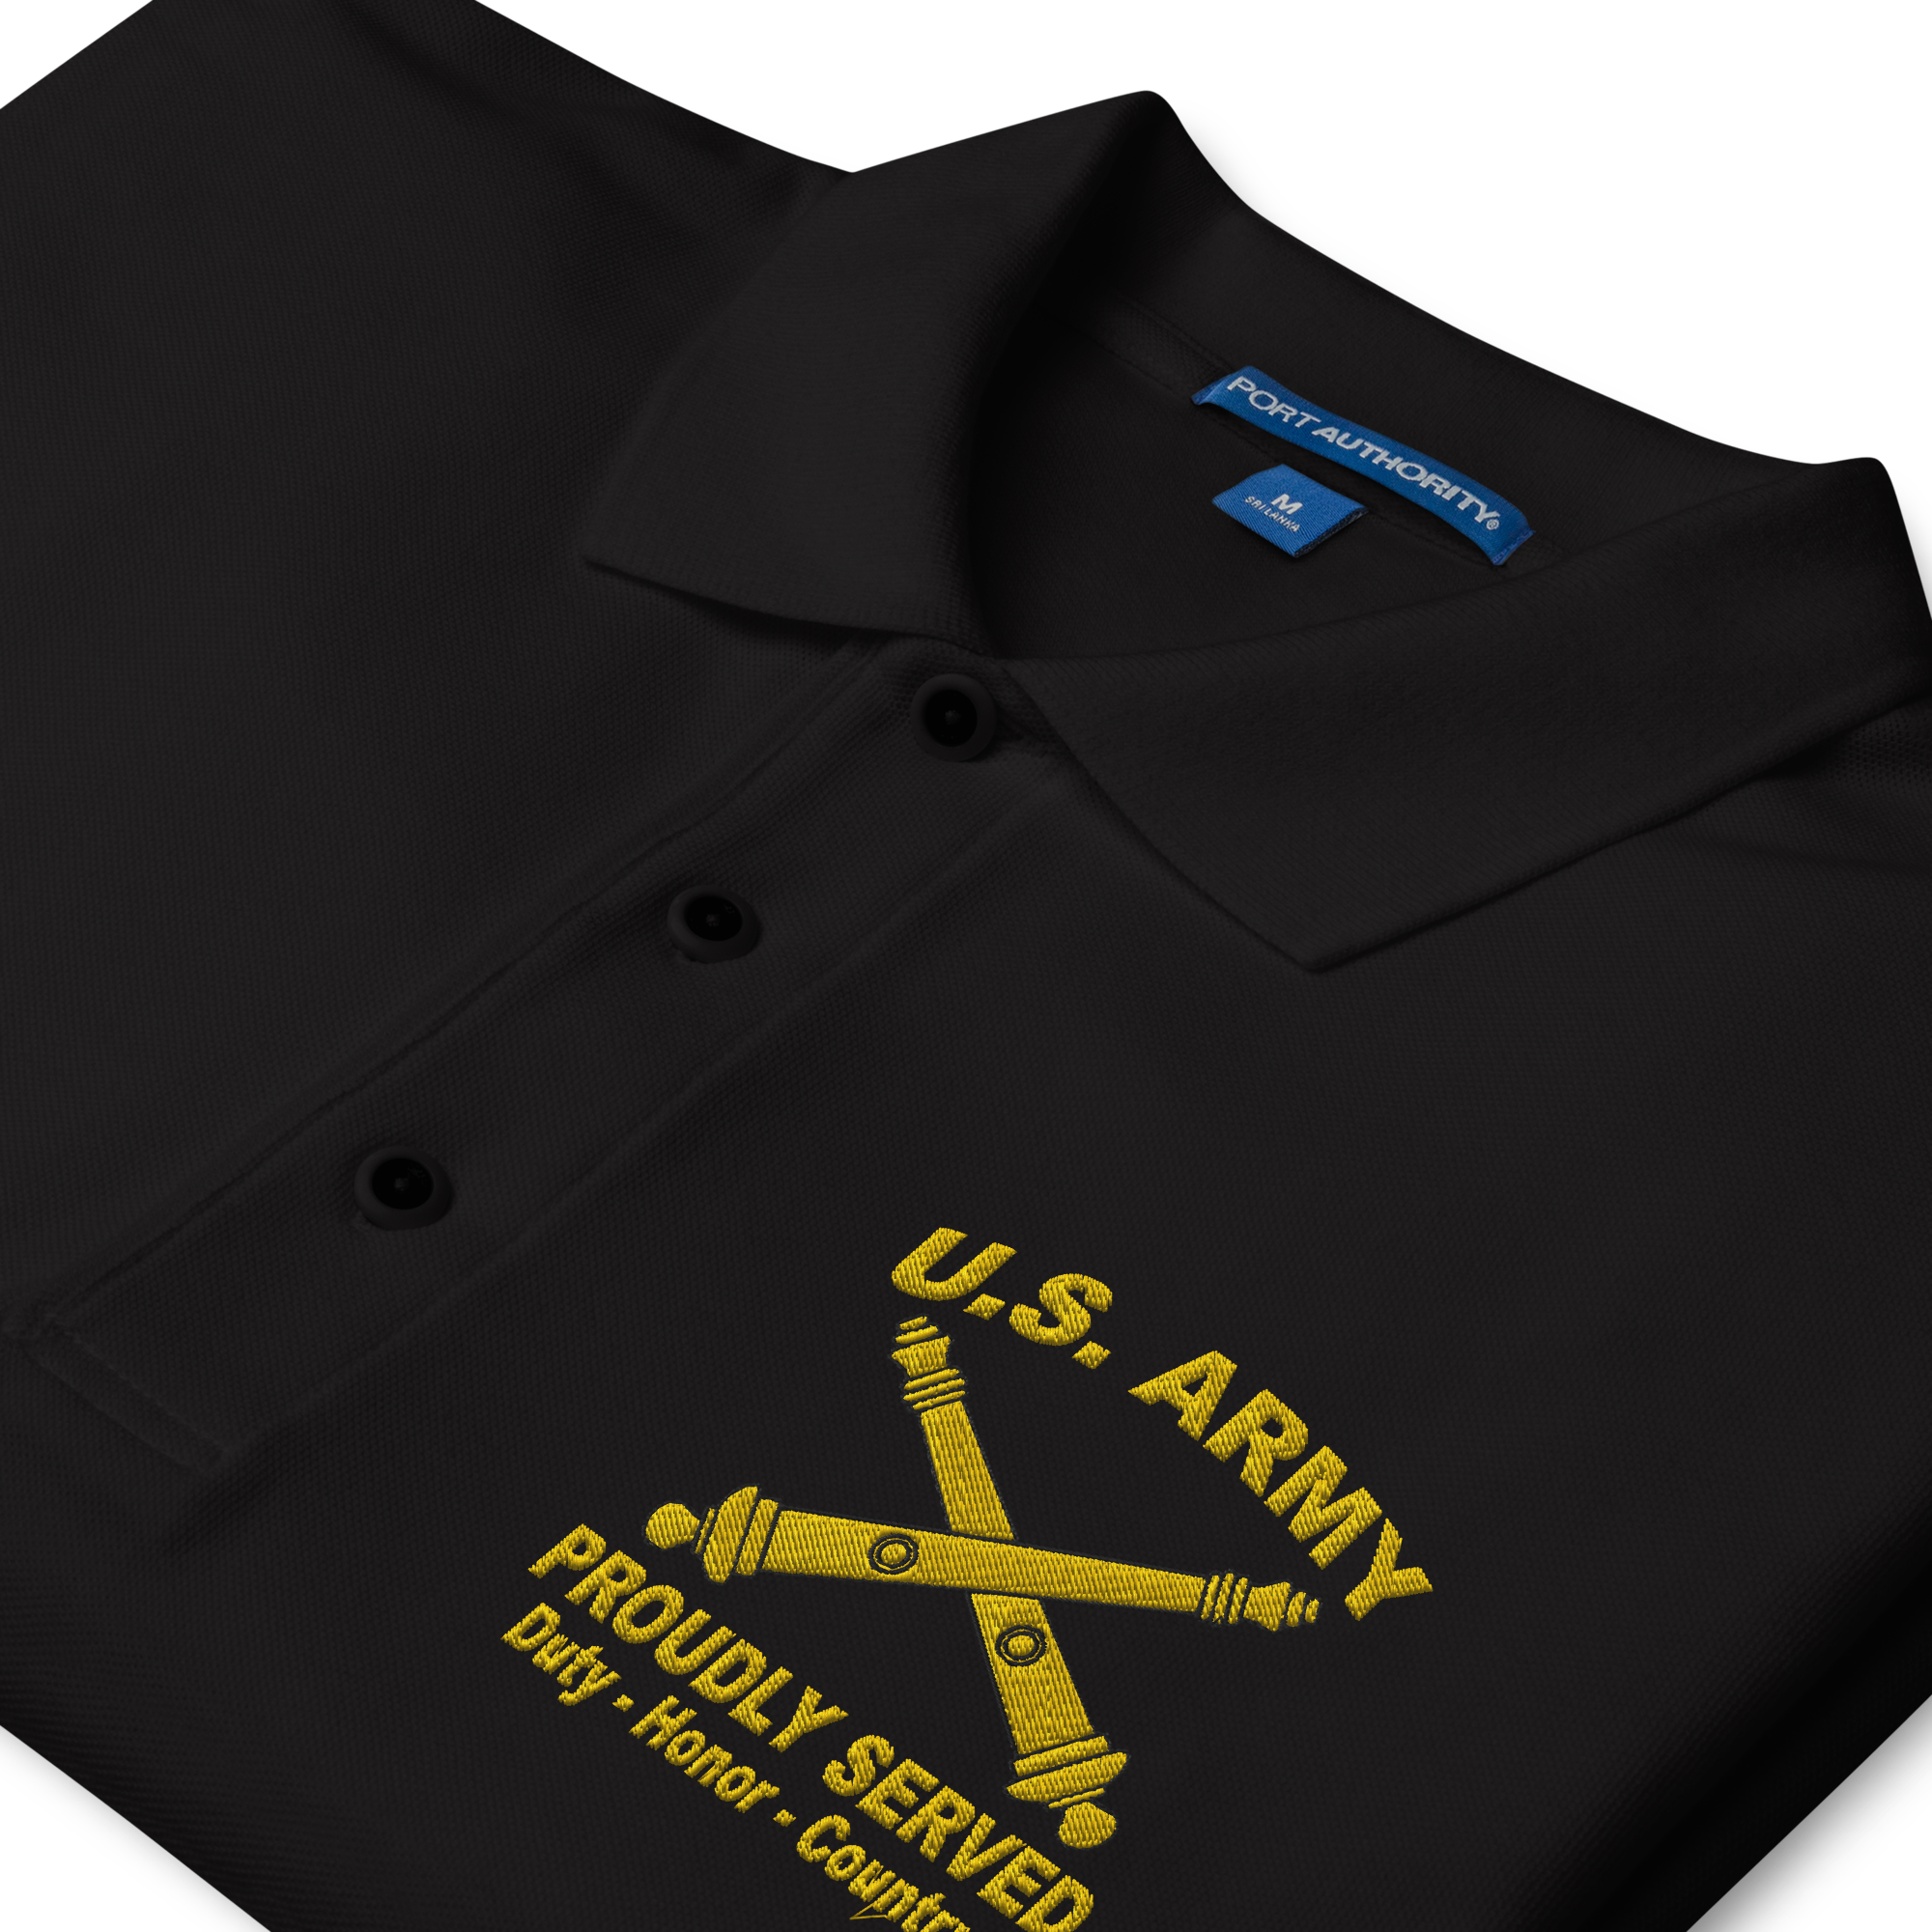 Custom US Army Ranks, Insignia Core Values Embroidered Port Authority Polo Shirt